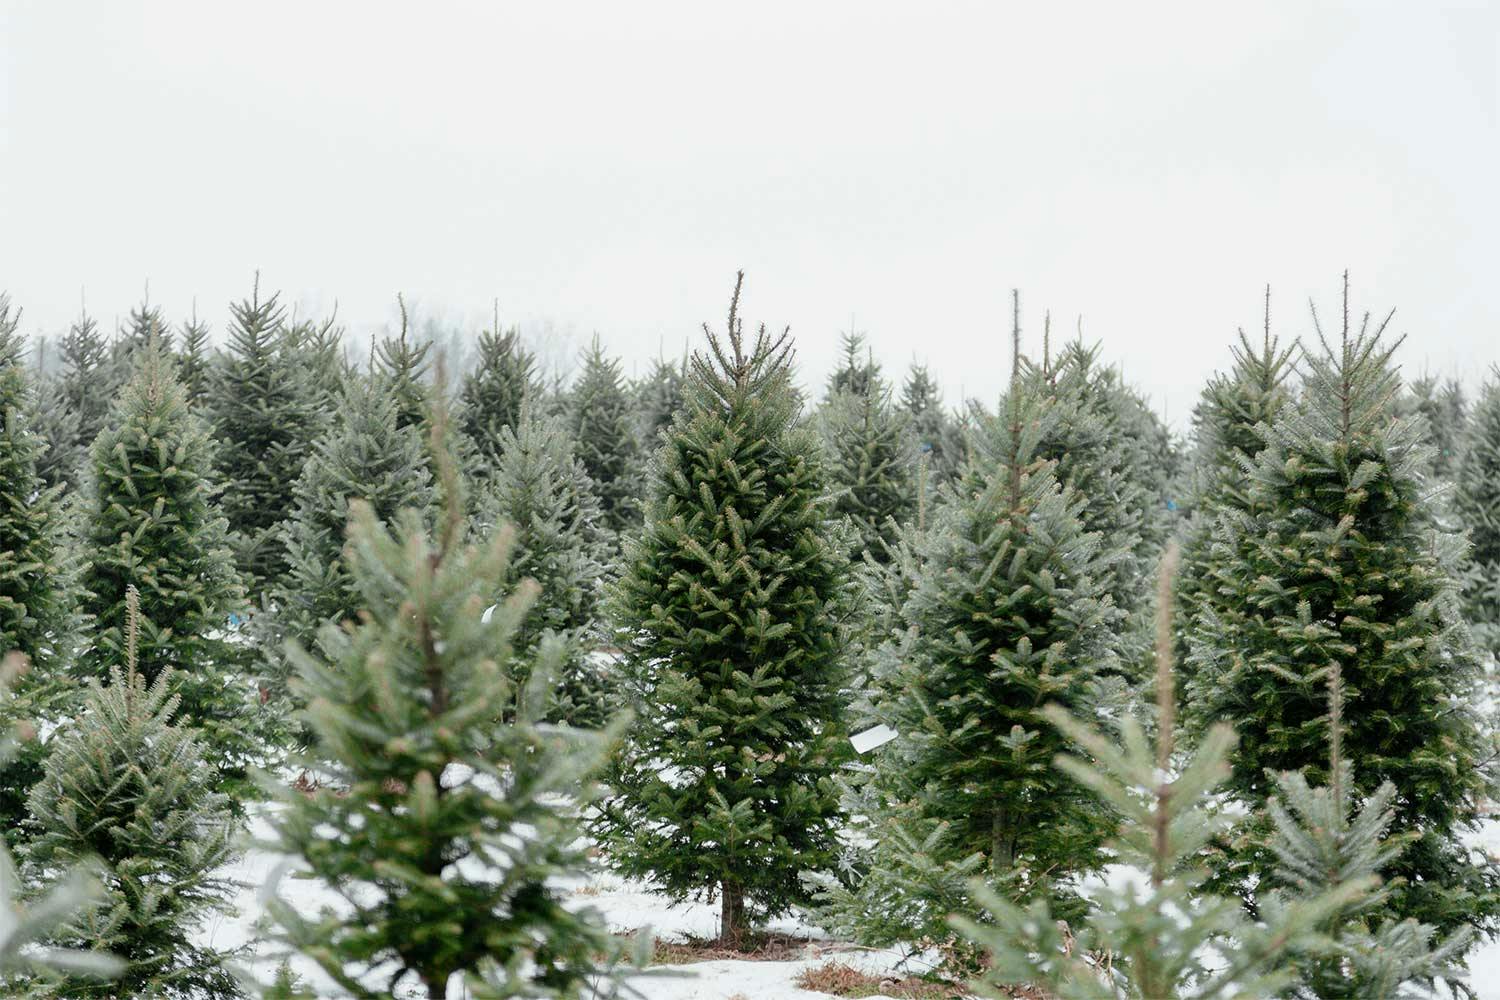 Rows of Christmas trees on a field blanketed in a thin layer of snow.